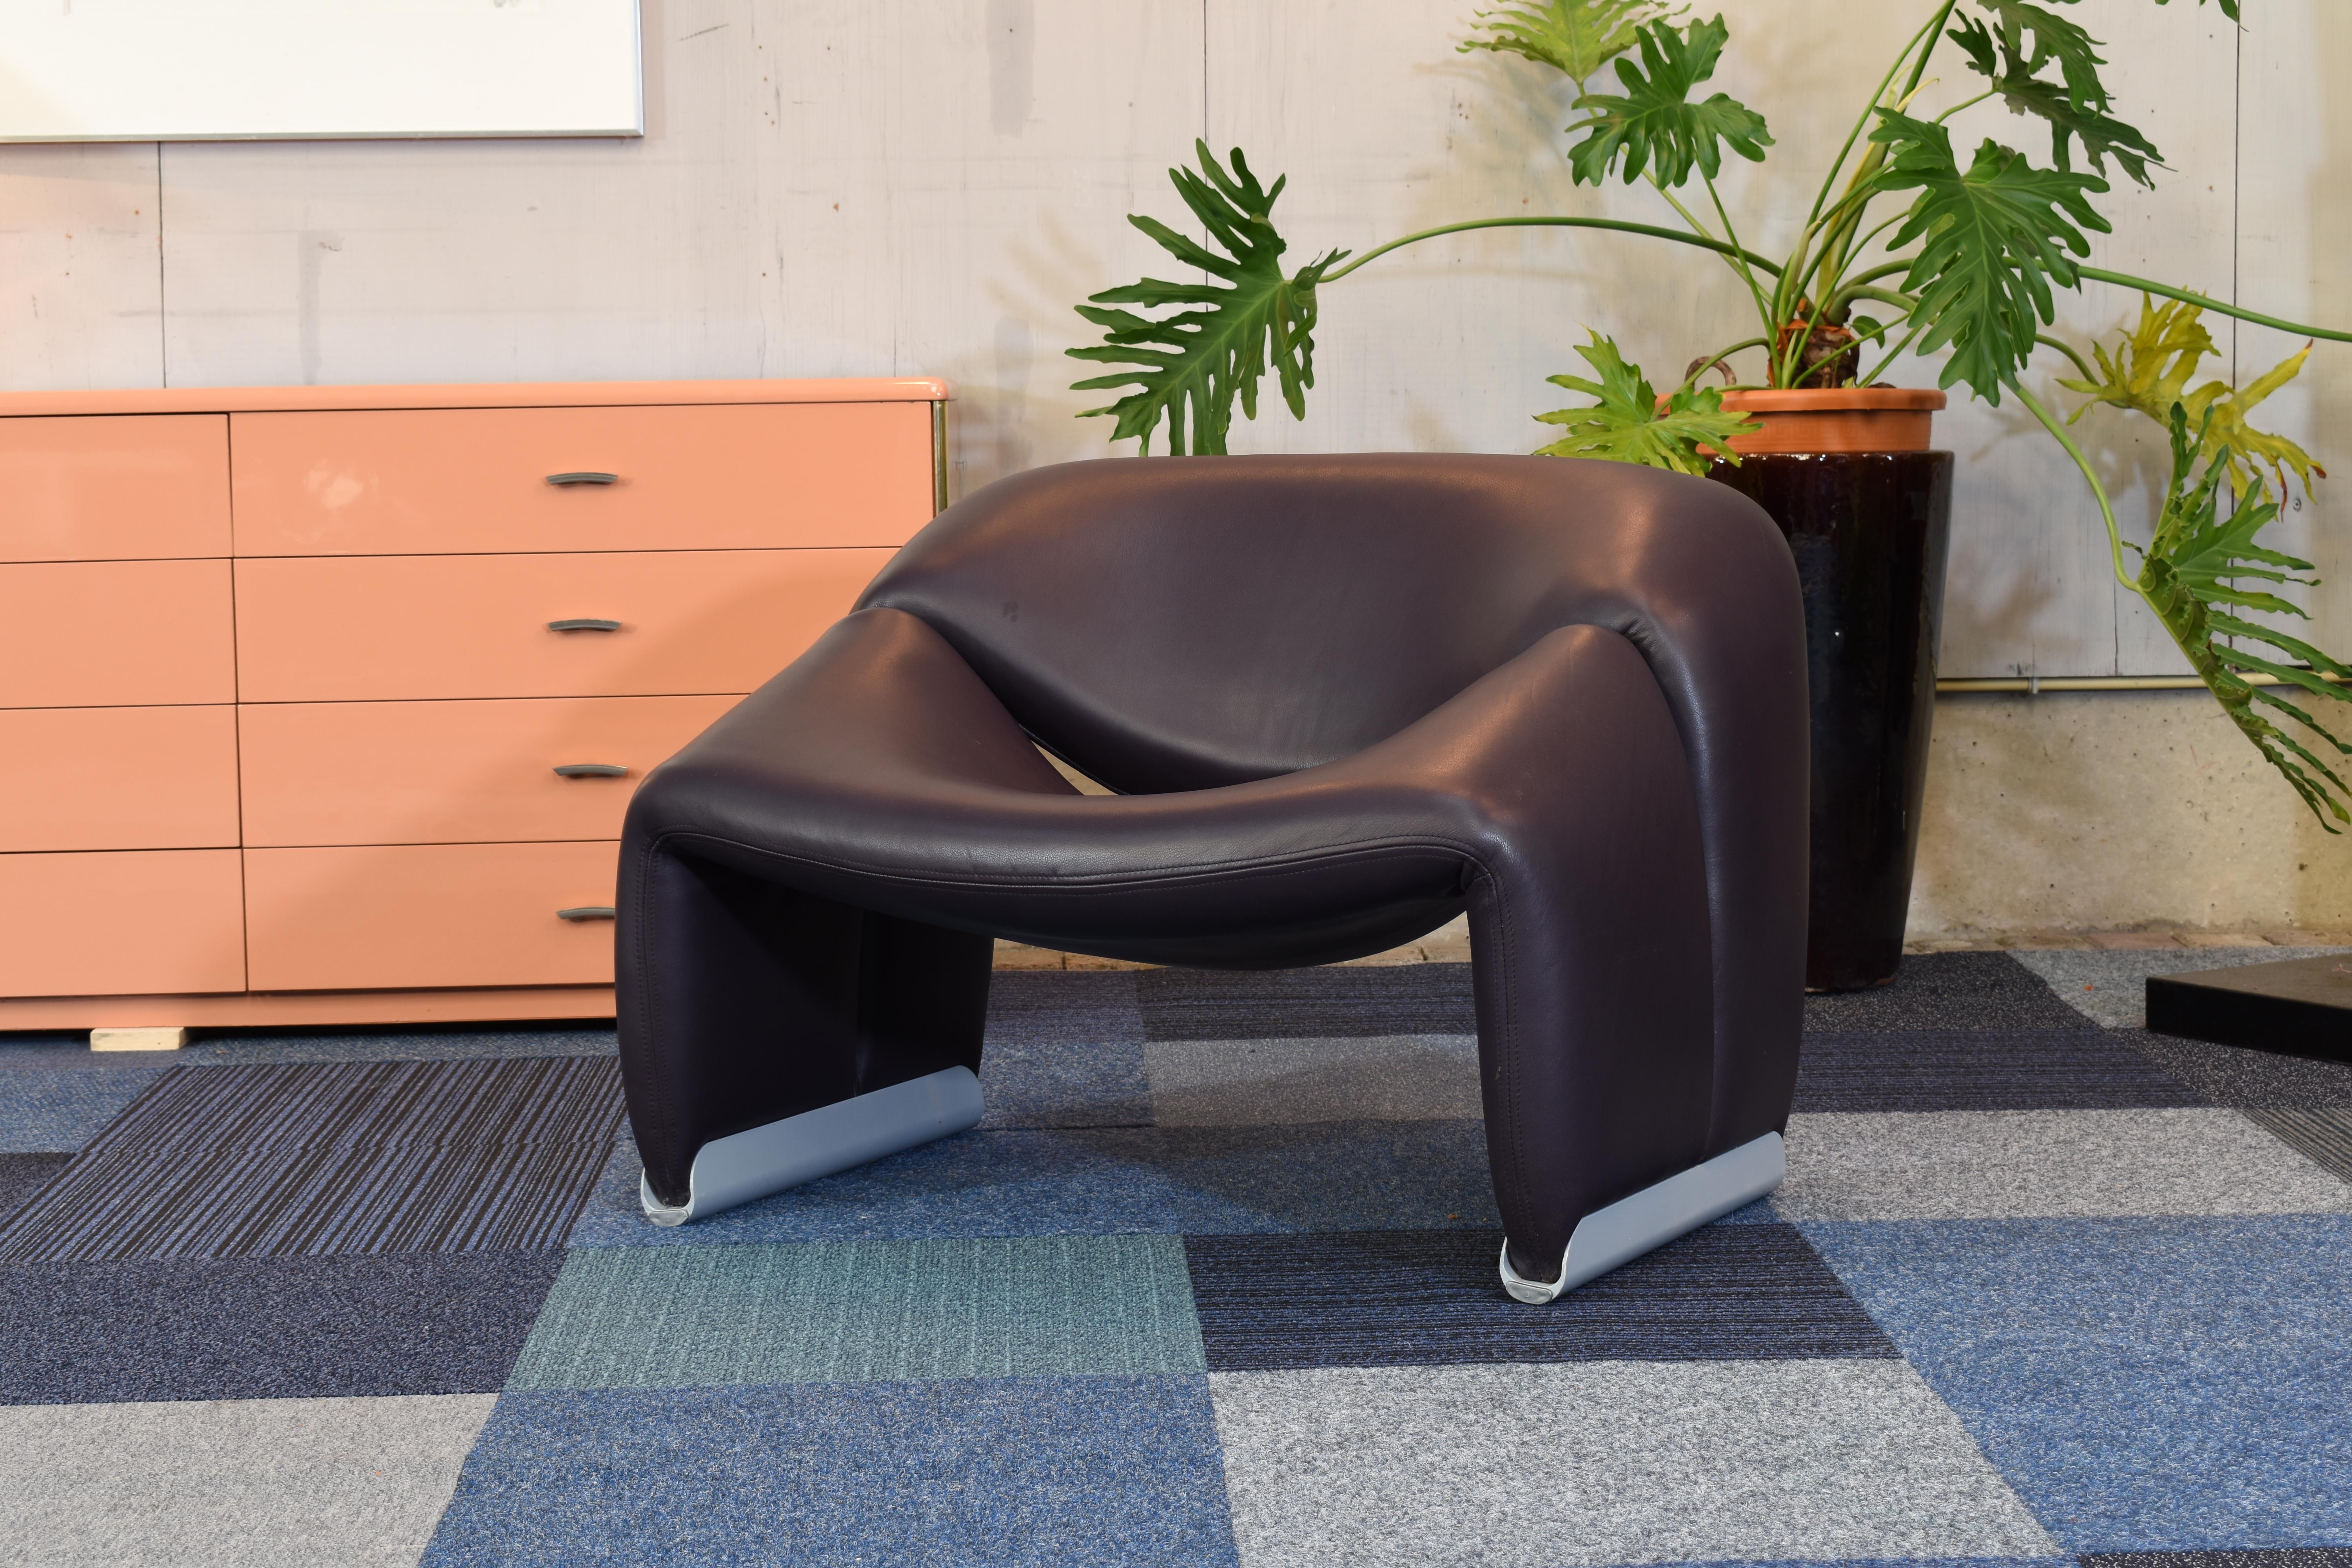 F598 ‘Groovy’ 'M' lounge chair by Pierre Paulin for Artifort in purple leather.
The price is per chair.
We have more chairs available.

Designer: Pierre Paulin (France)
Manufacturer: Artifort (Netherlands)
Country: Netherlands
Model: F598